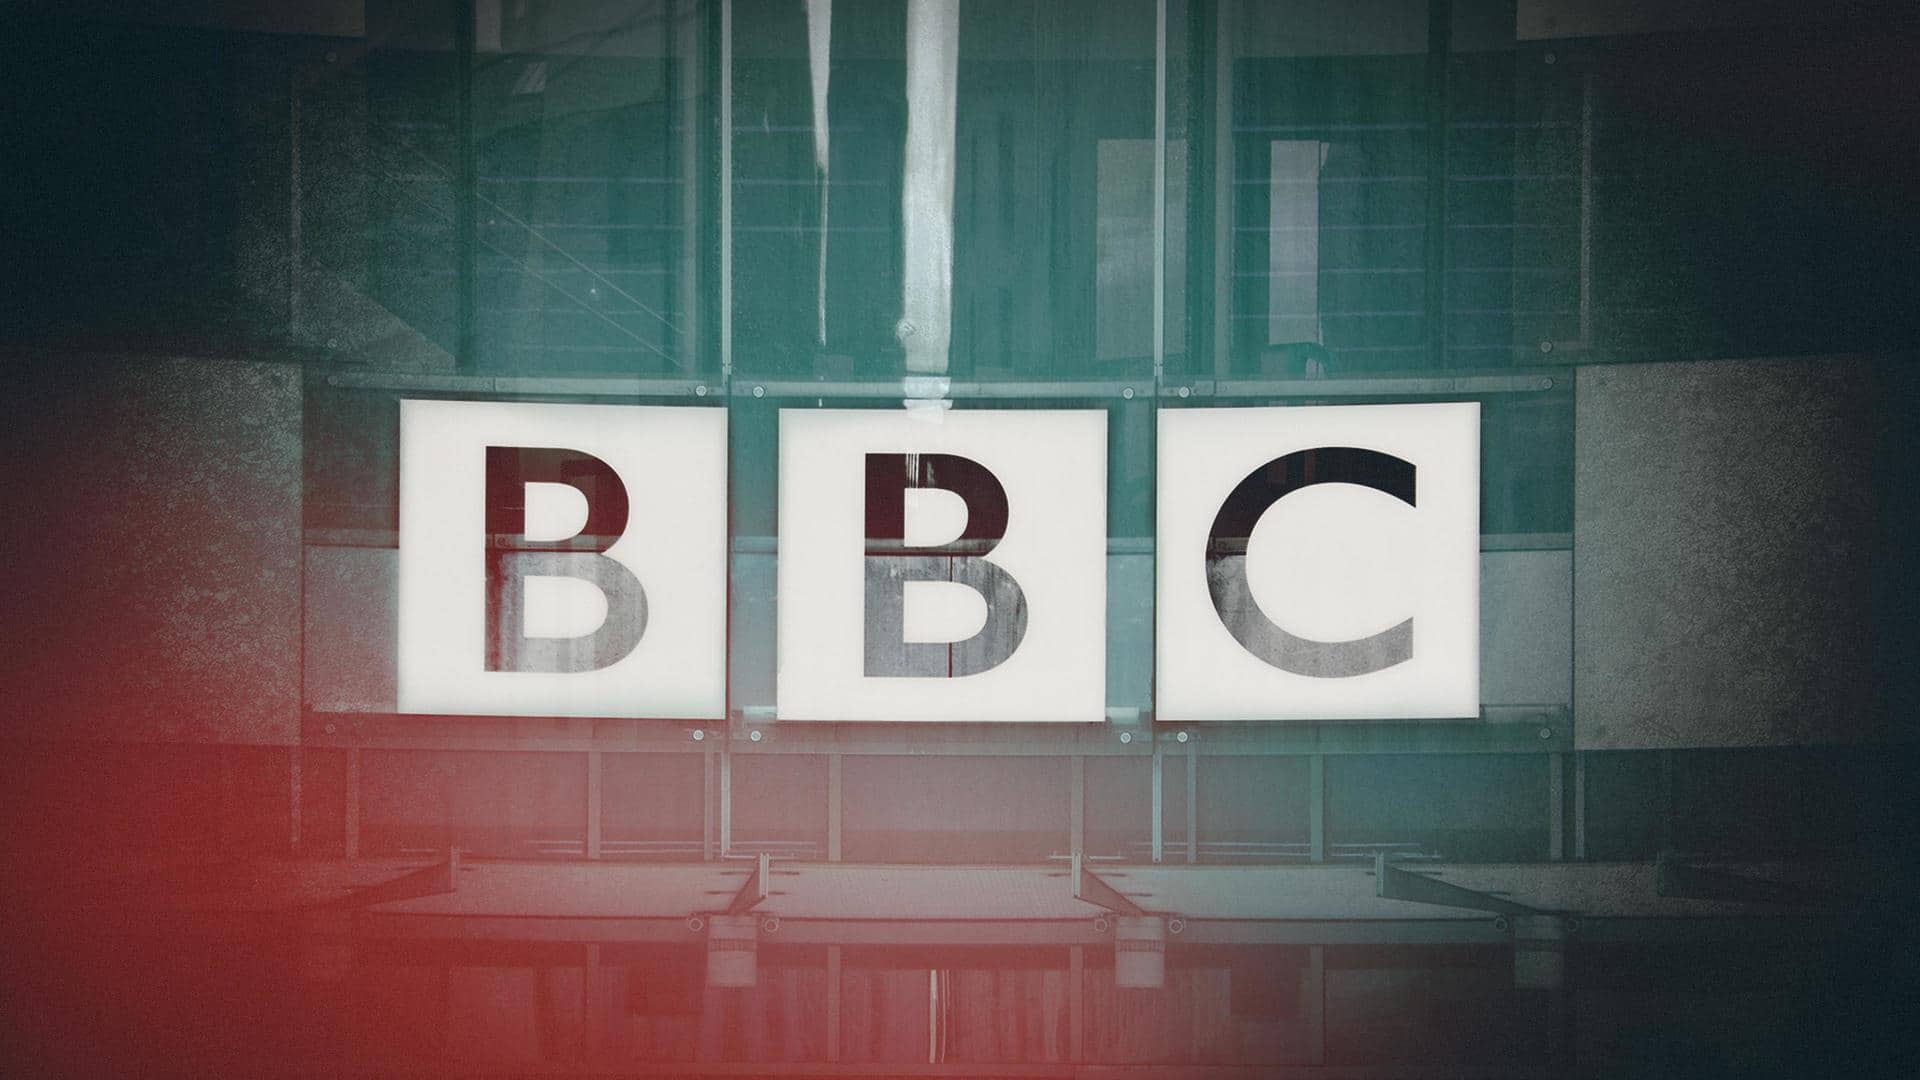 BBC presenter, who allegedly paid $45,000 for explicit pics, suspended